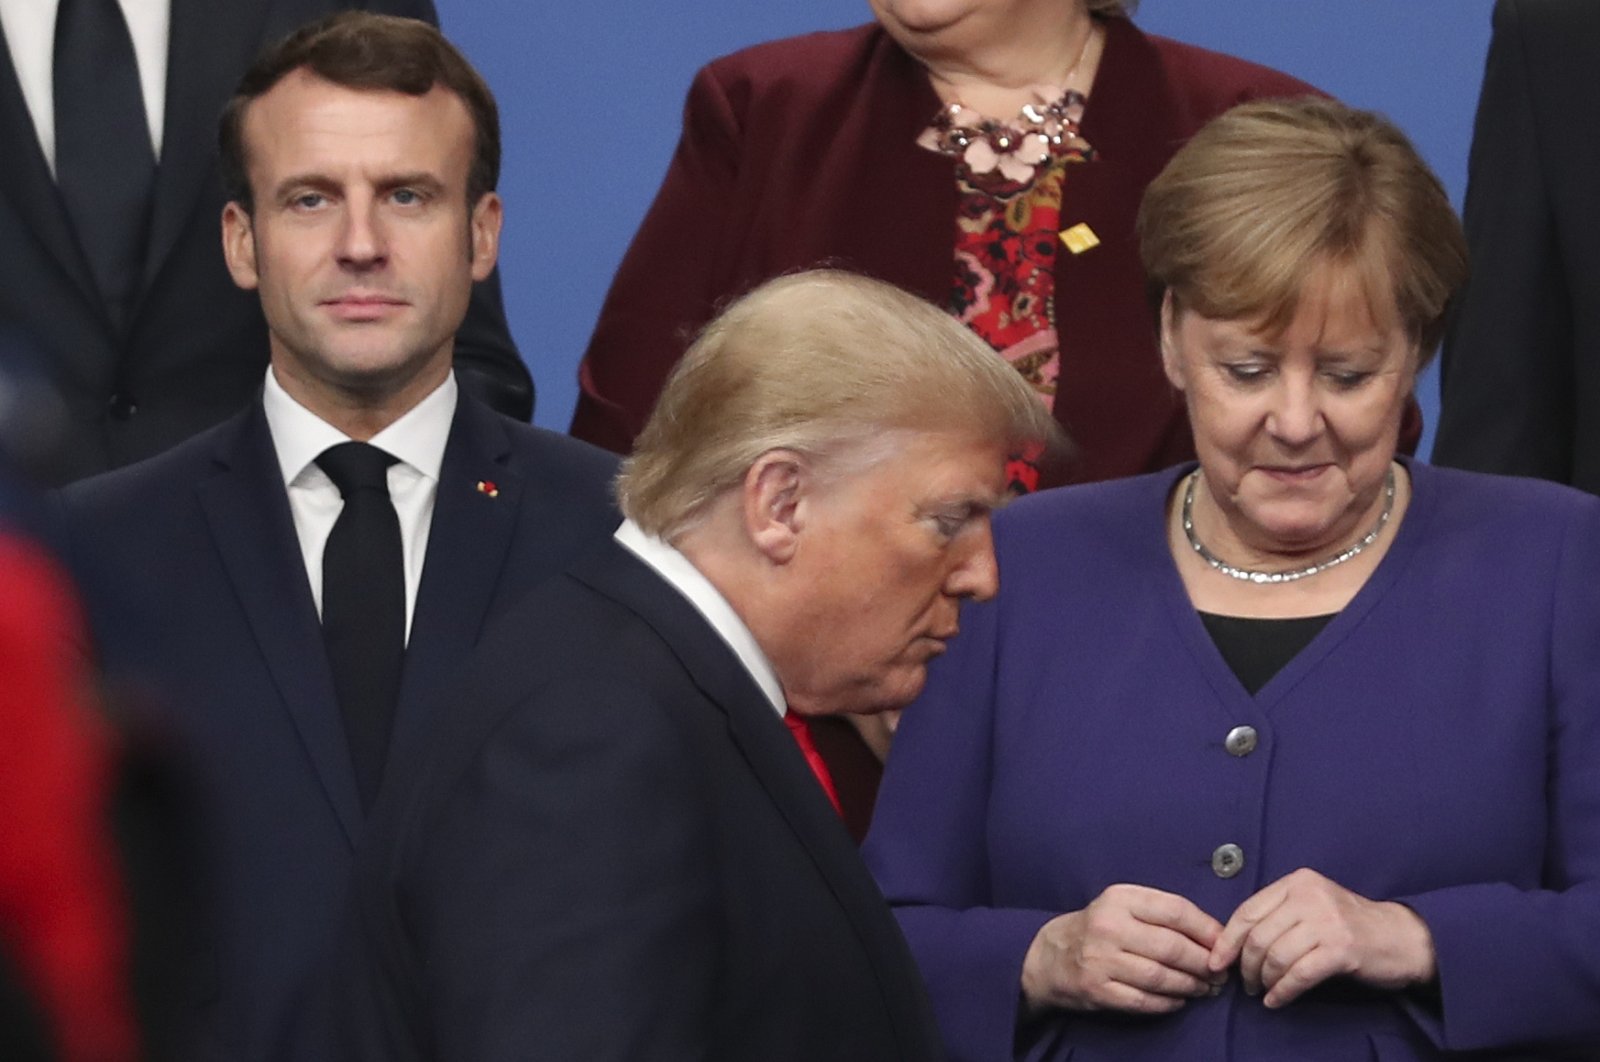 U.S. President Donald Trump (C) walks by French President Emmanuel Macron (L) and German Chancellor Angela Merkel (R) prior to a group photo of NATO leaders during a NATO leaders' meeting at The Grove hotel and resort in Watford, Britain, Dec. 4, 2019. (AP Photo)